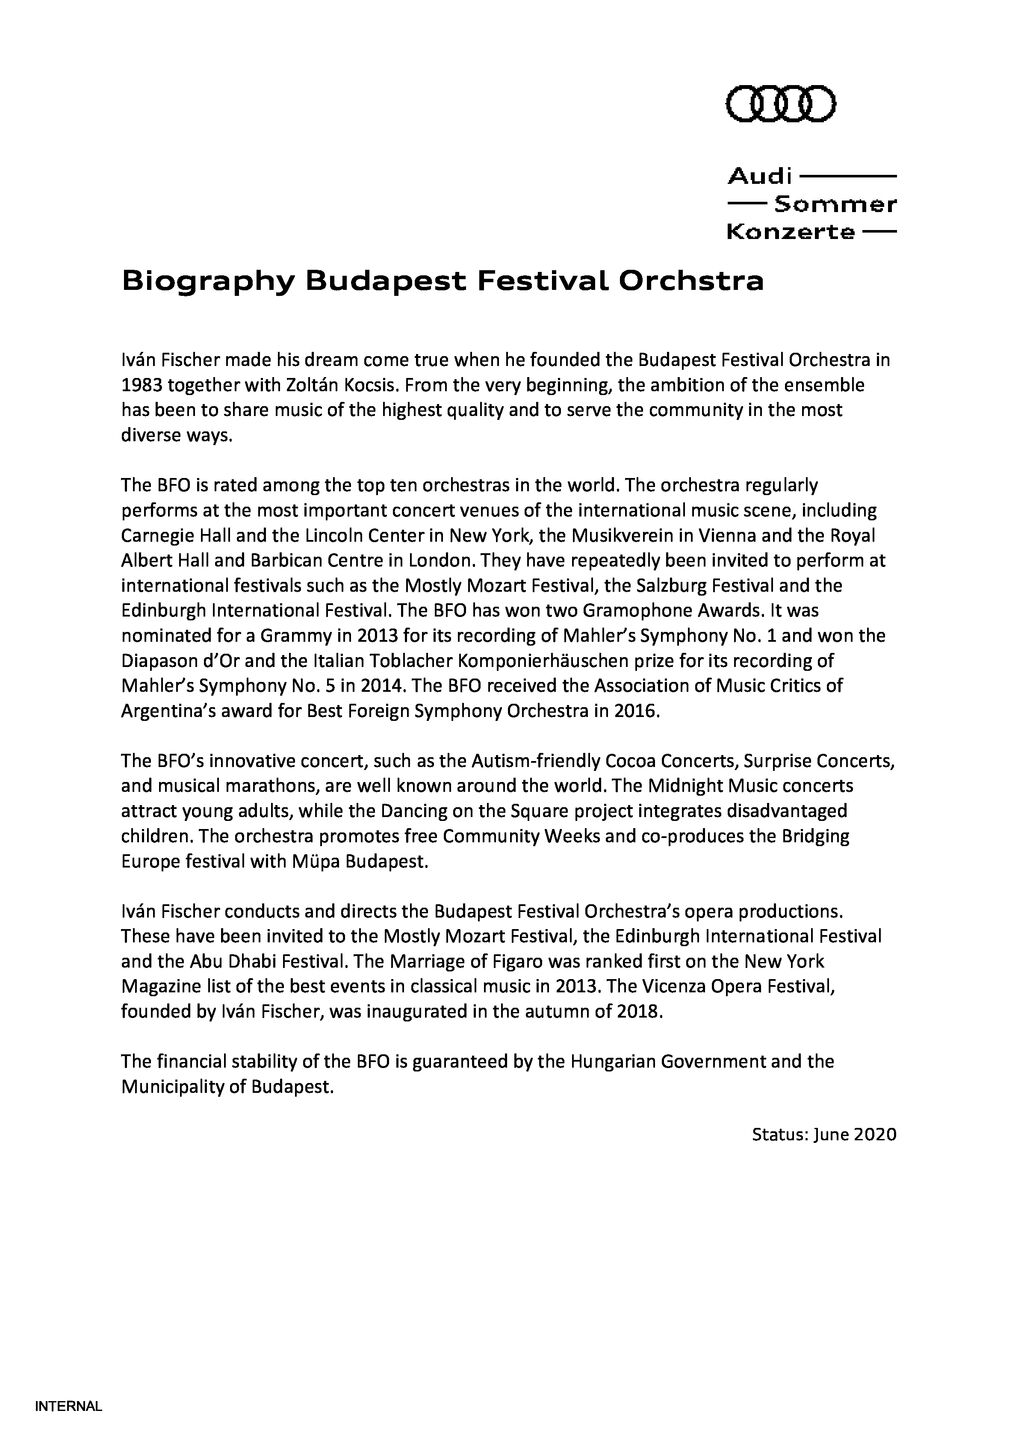 Biography Budapest Festival Orchstra